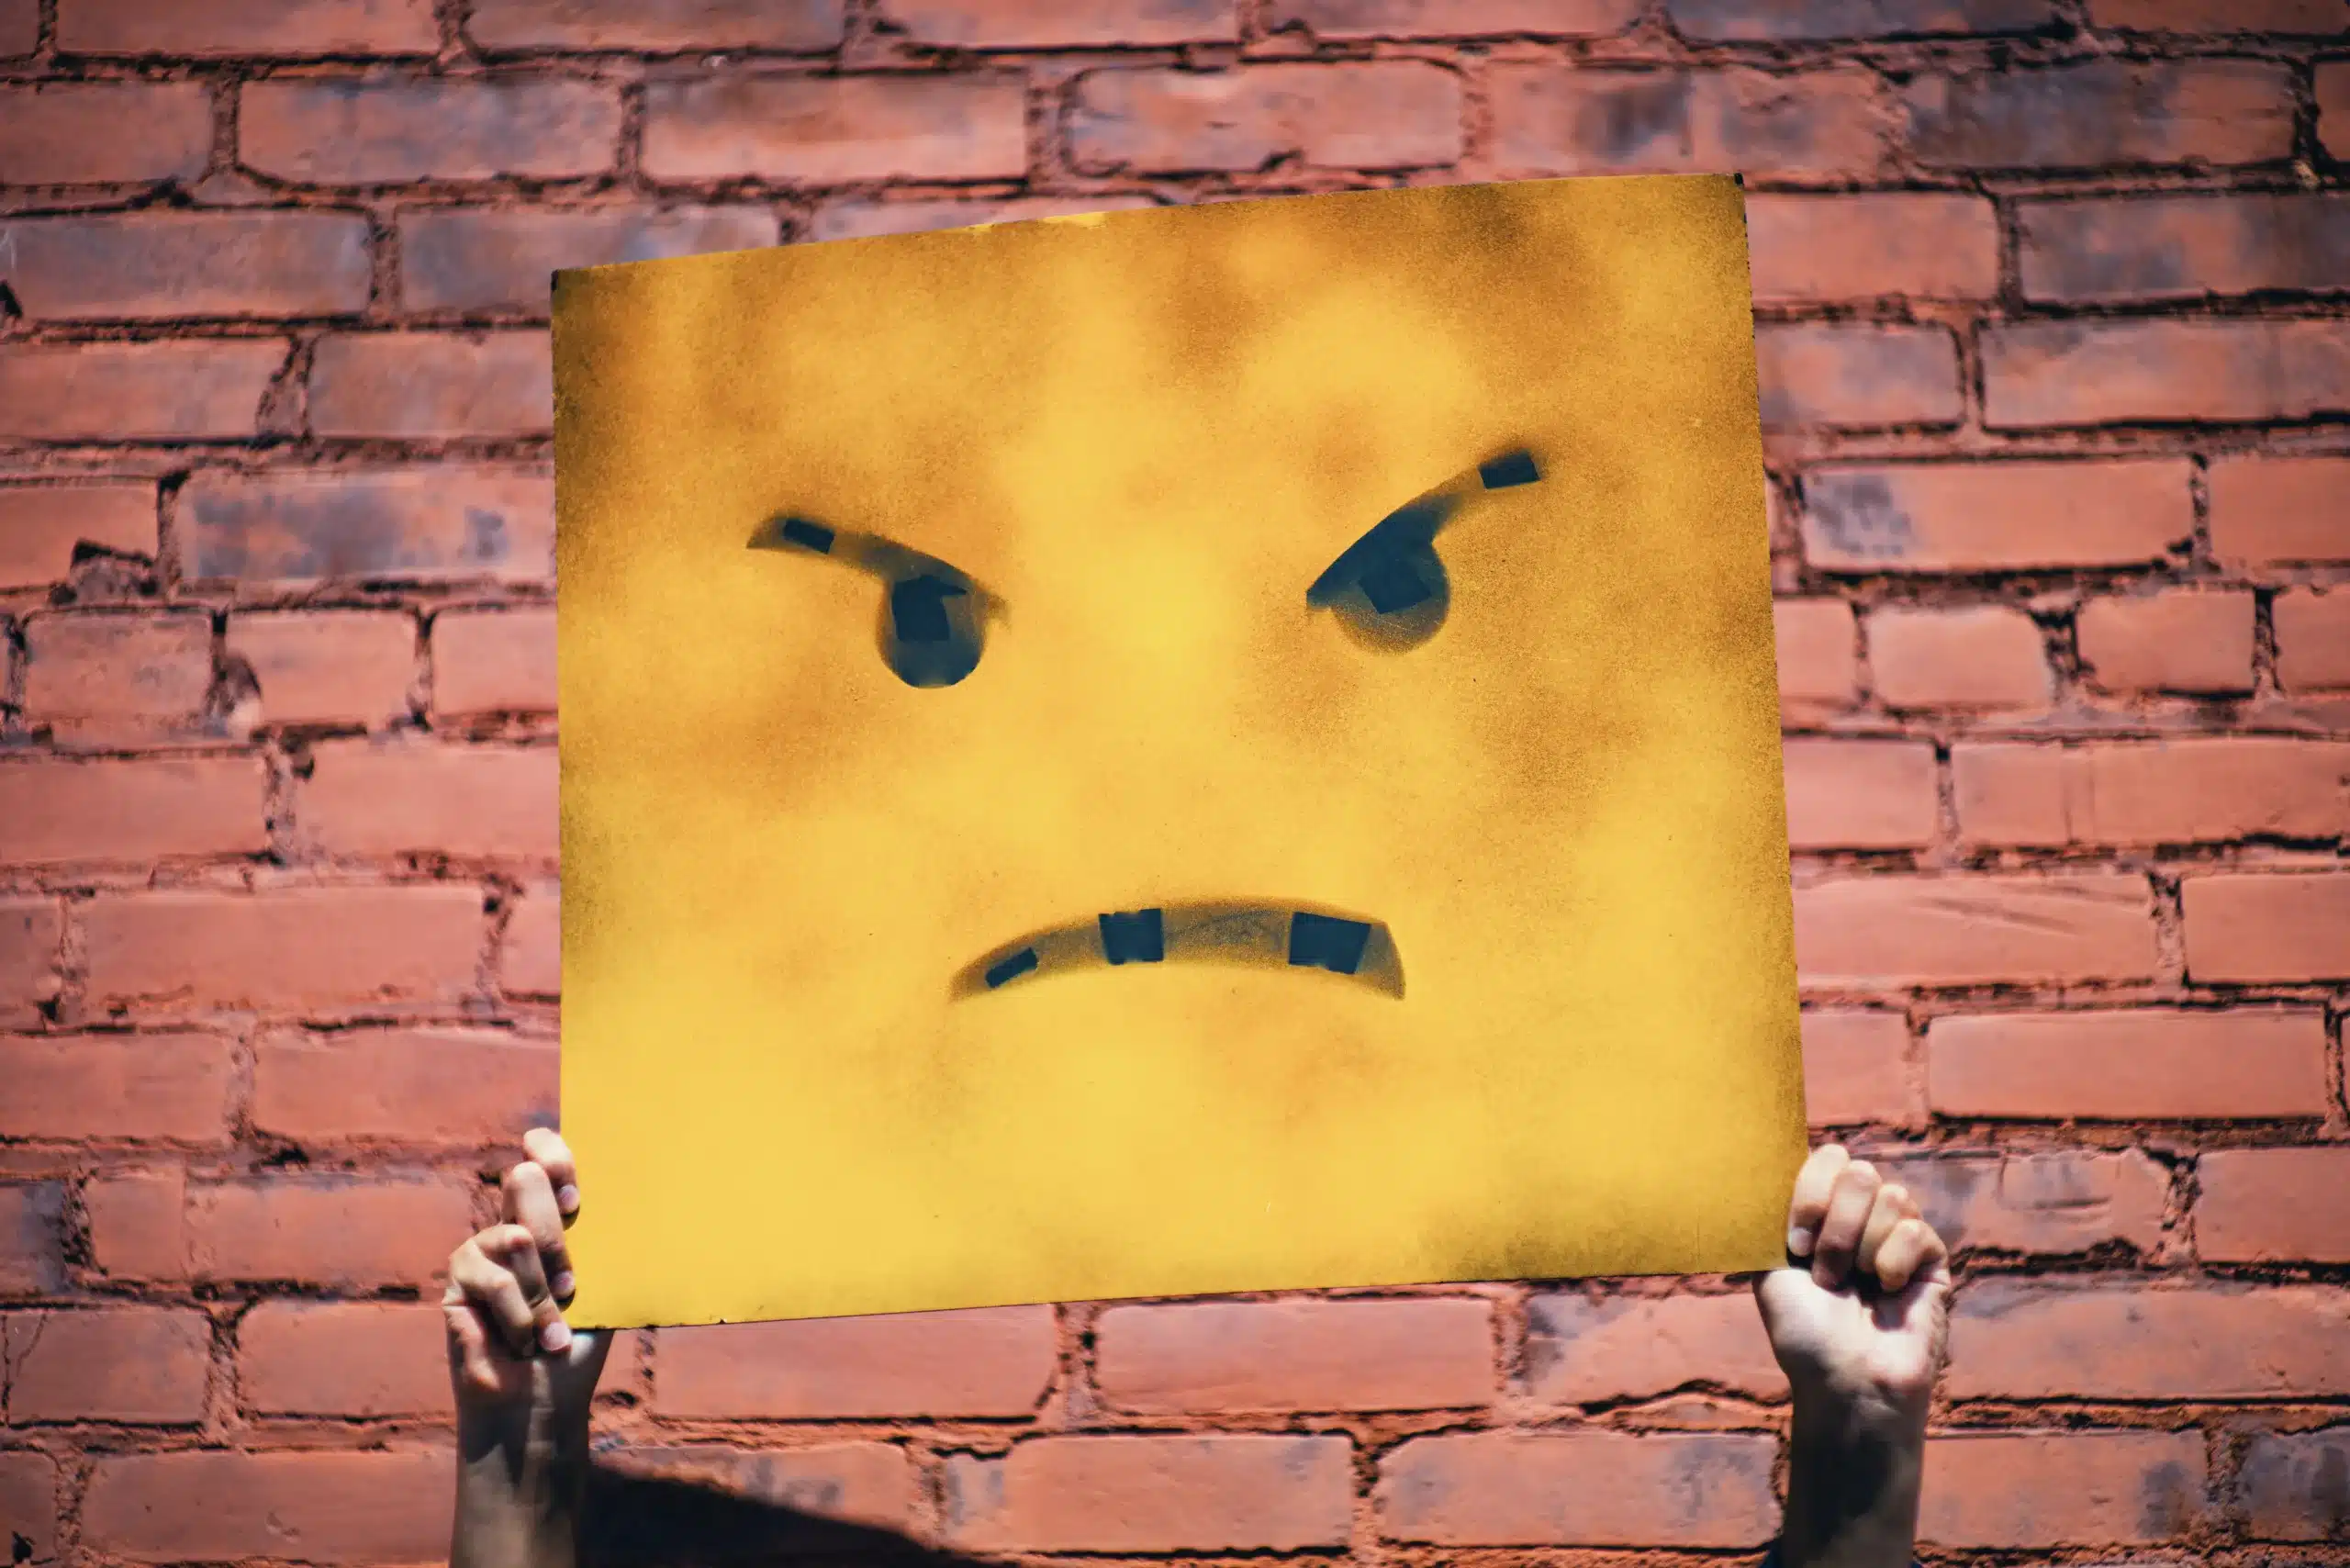 A square angry face against a brick wall